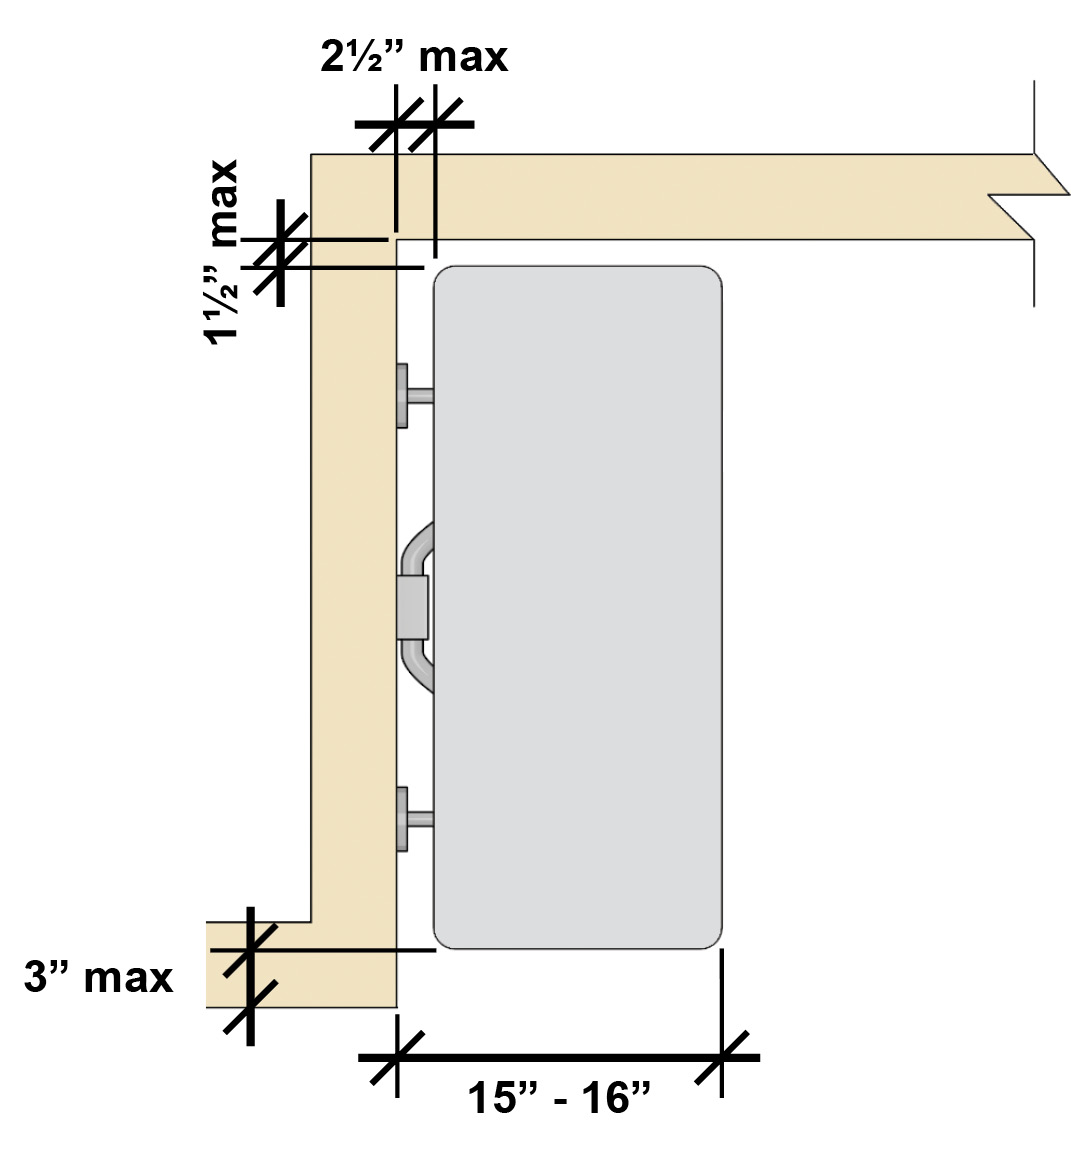 Rectangular shower seat with a rear edge that is 2½ inches maximum from the seat wall and a front edge 15 inches to 16 inches from the seat wall. The side edge is 1½ inches from the adjacent wall. The seat must extend to a point within 3 inches of the compartment entry.